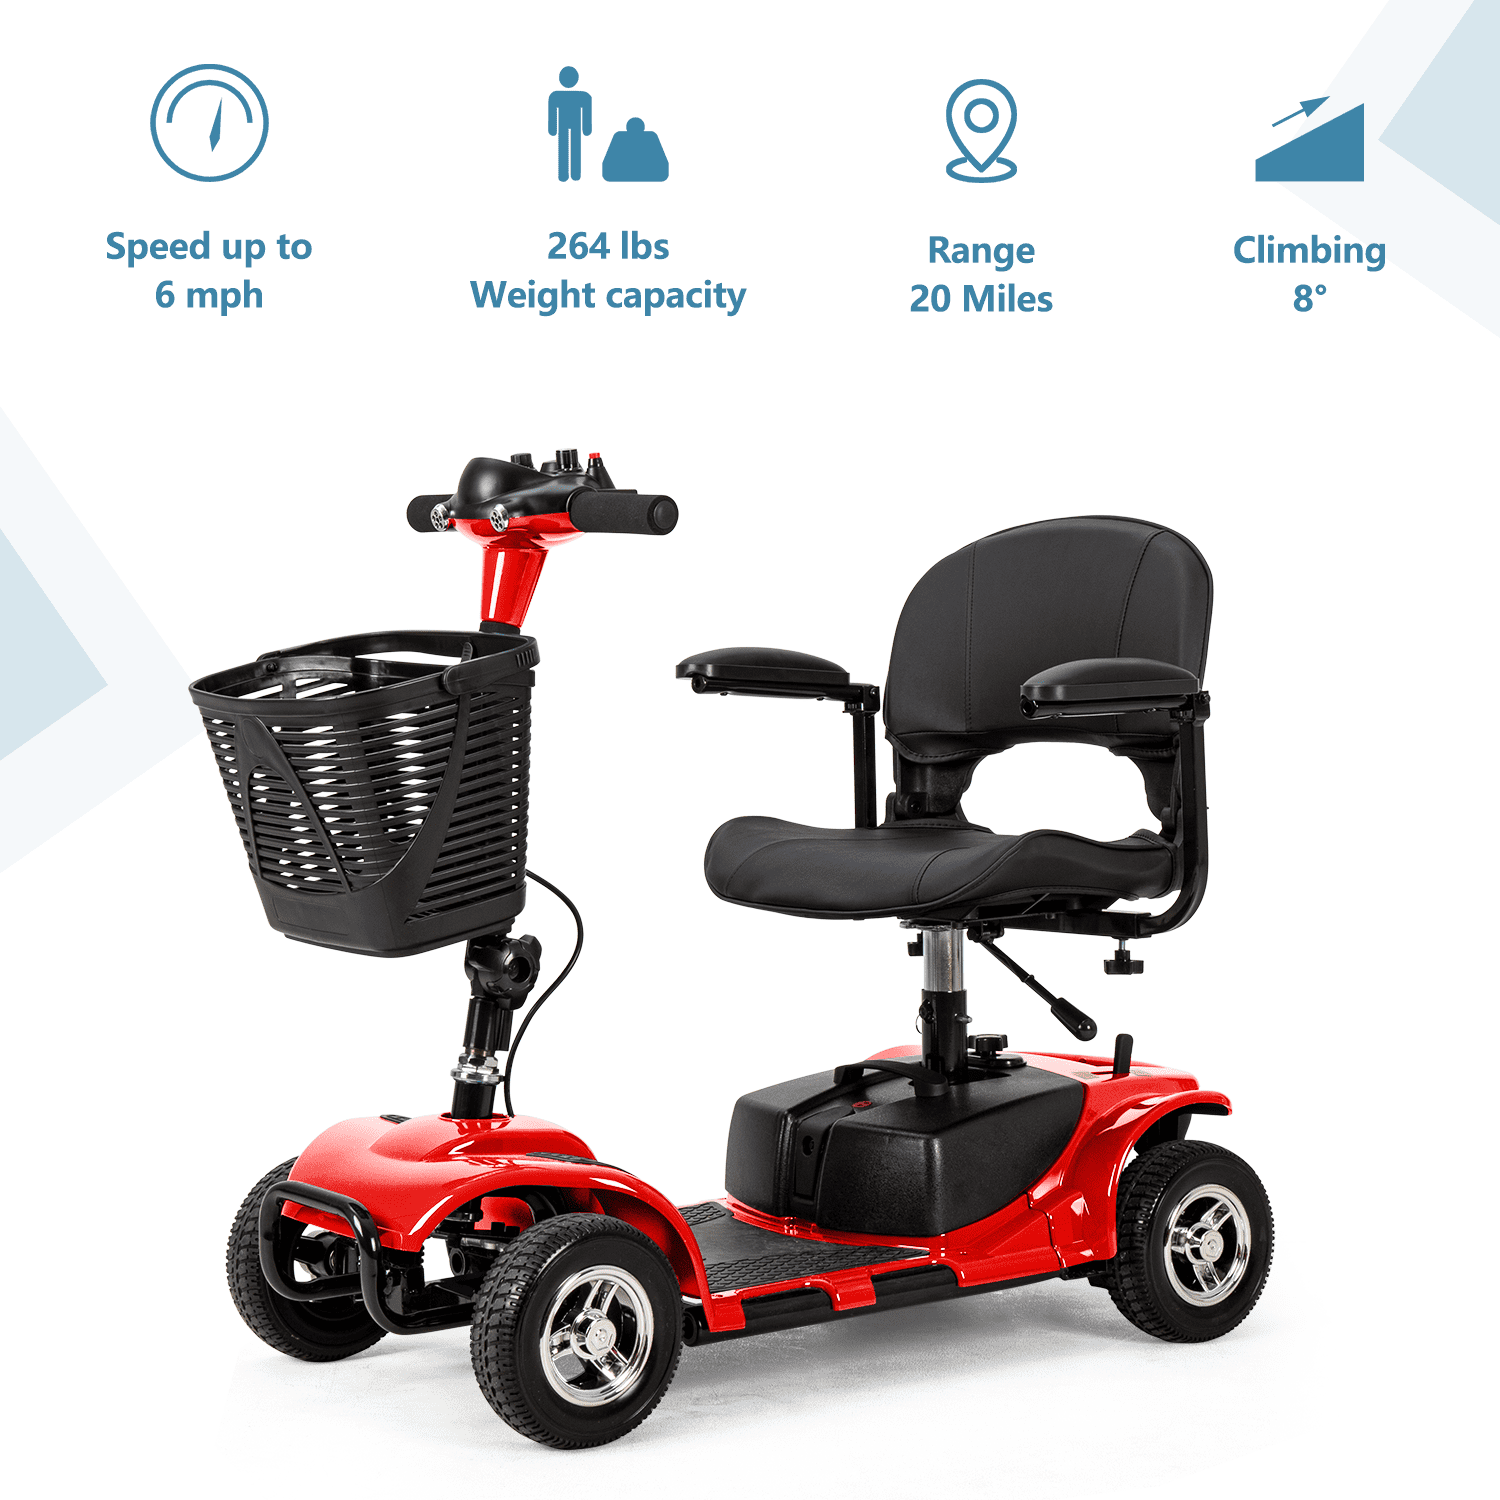 Mobility Scooter 4 Wheel Electric Mobility Scooter Folding Mobile Wheelchair w/Basket for Seniors Adult,Max Weight 300 lbs,Red